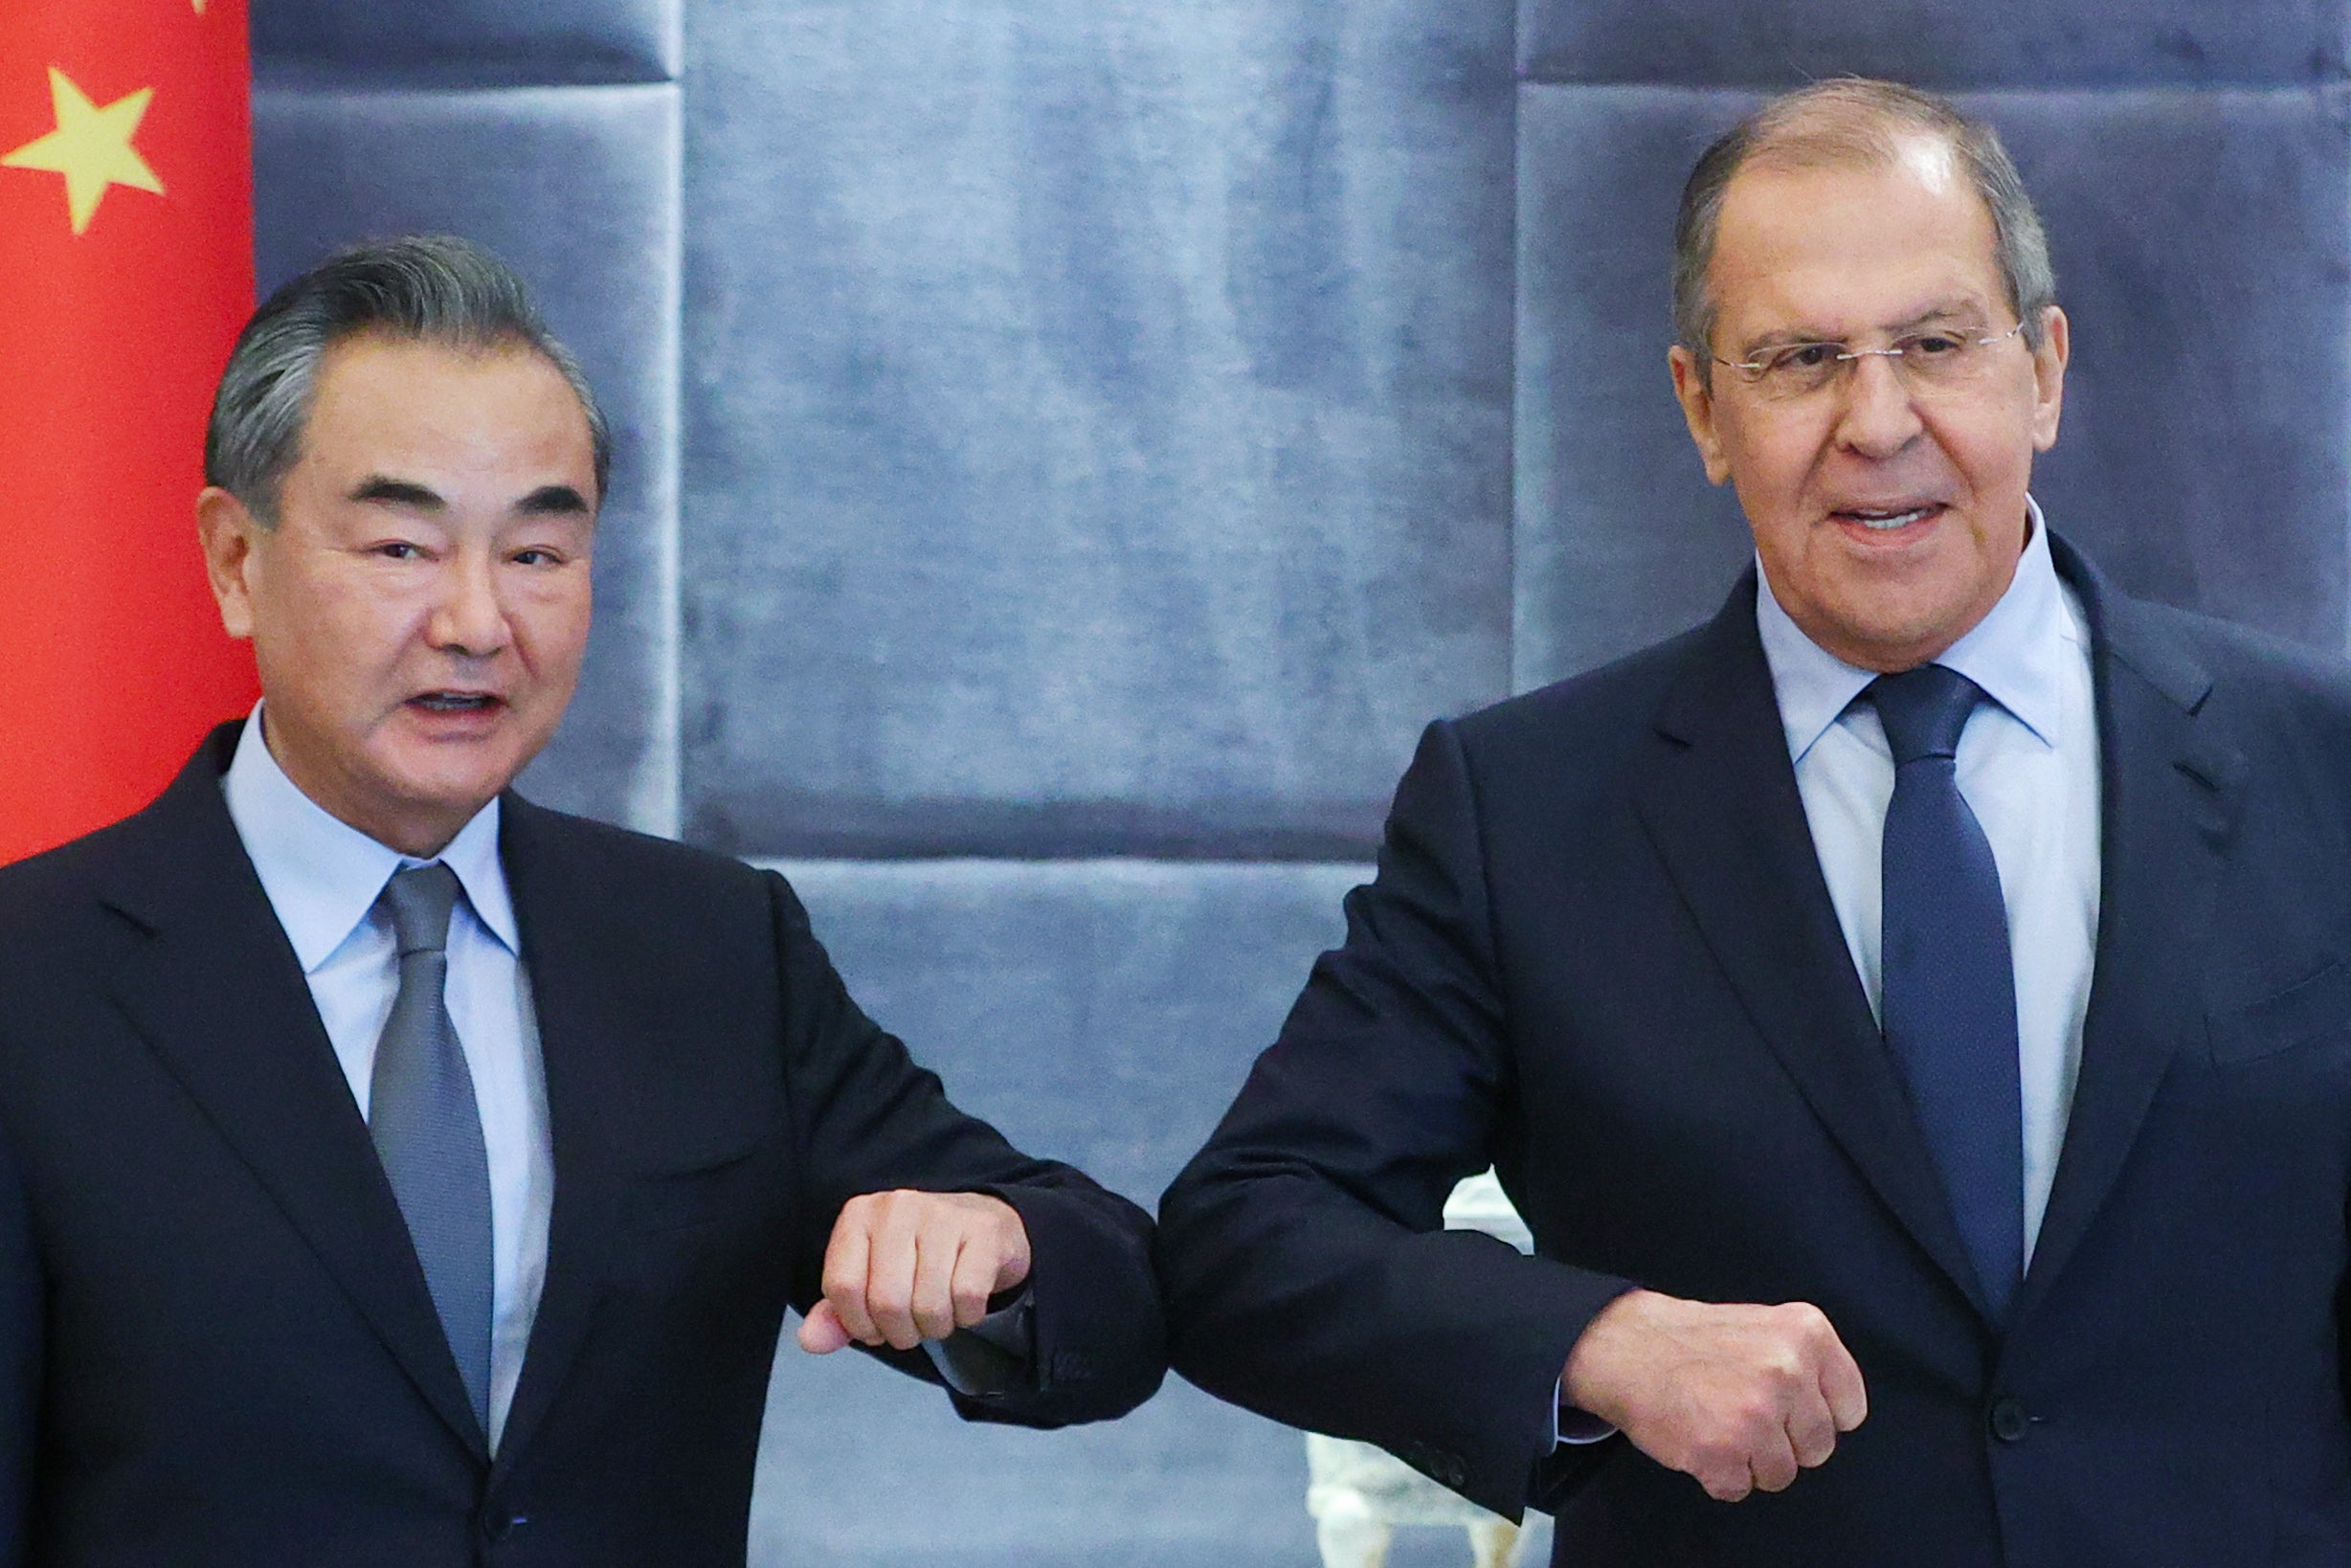 China's Foreign Minister Wang Yi (L) and his Russian counterpart Sergei Lavrov bump elbows as they meet for talks